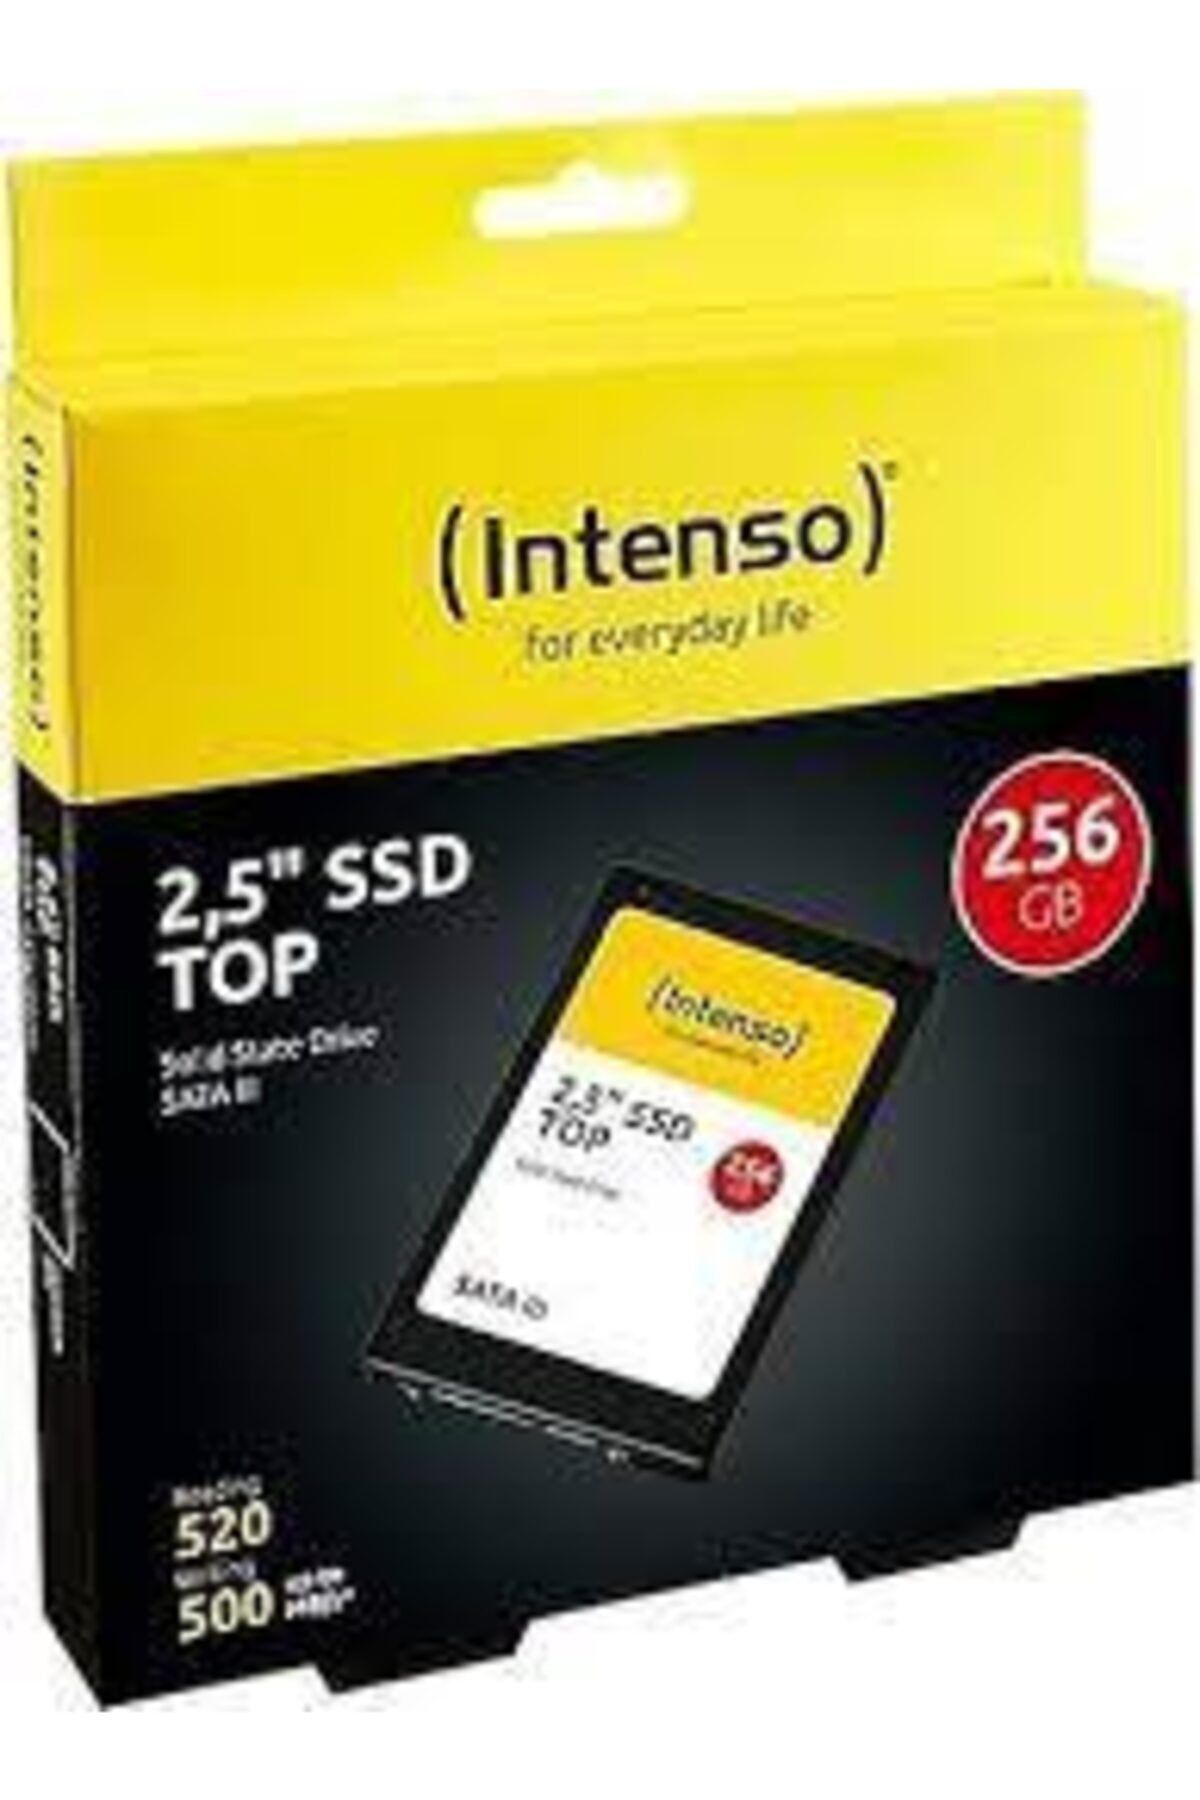 Intenso 256gb Ssd Sisk Top 2.5" Sata 3 520-500mb/s